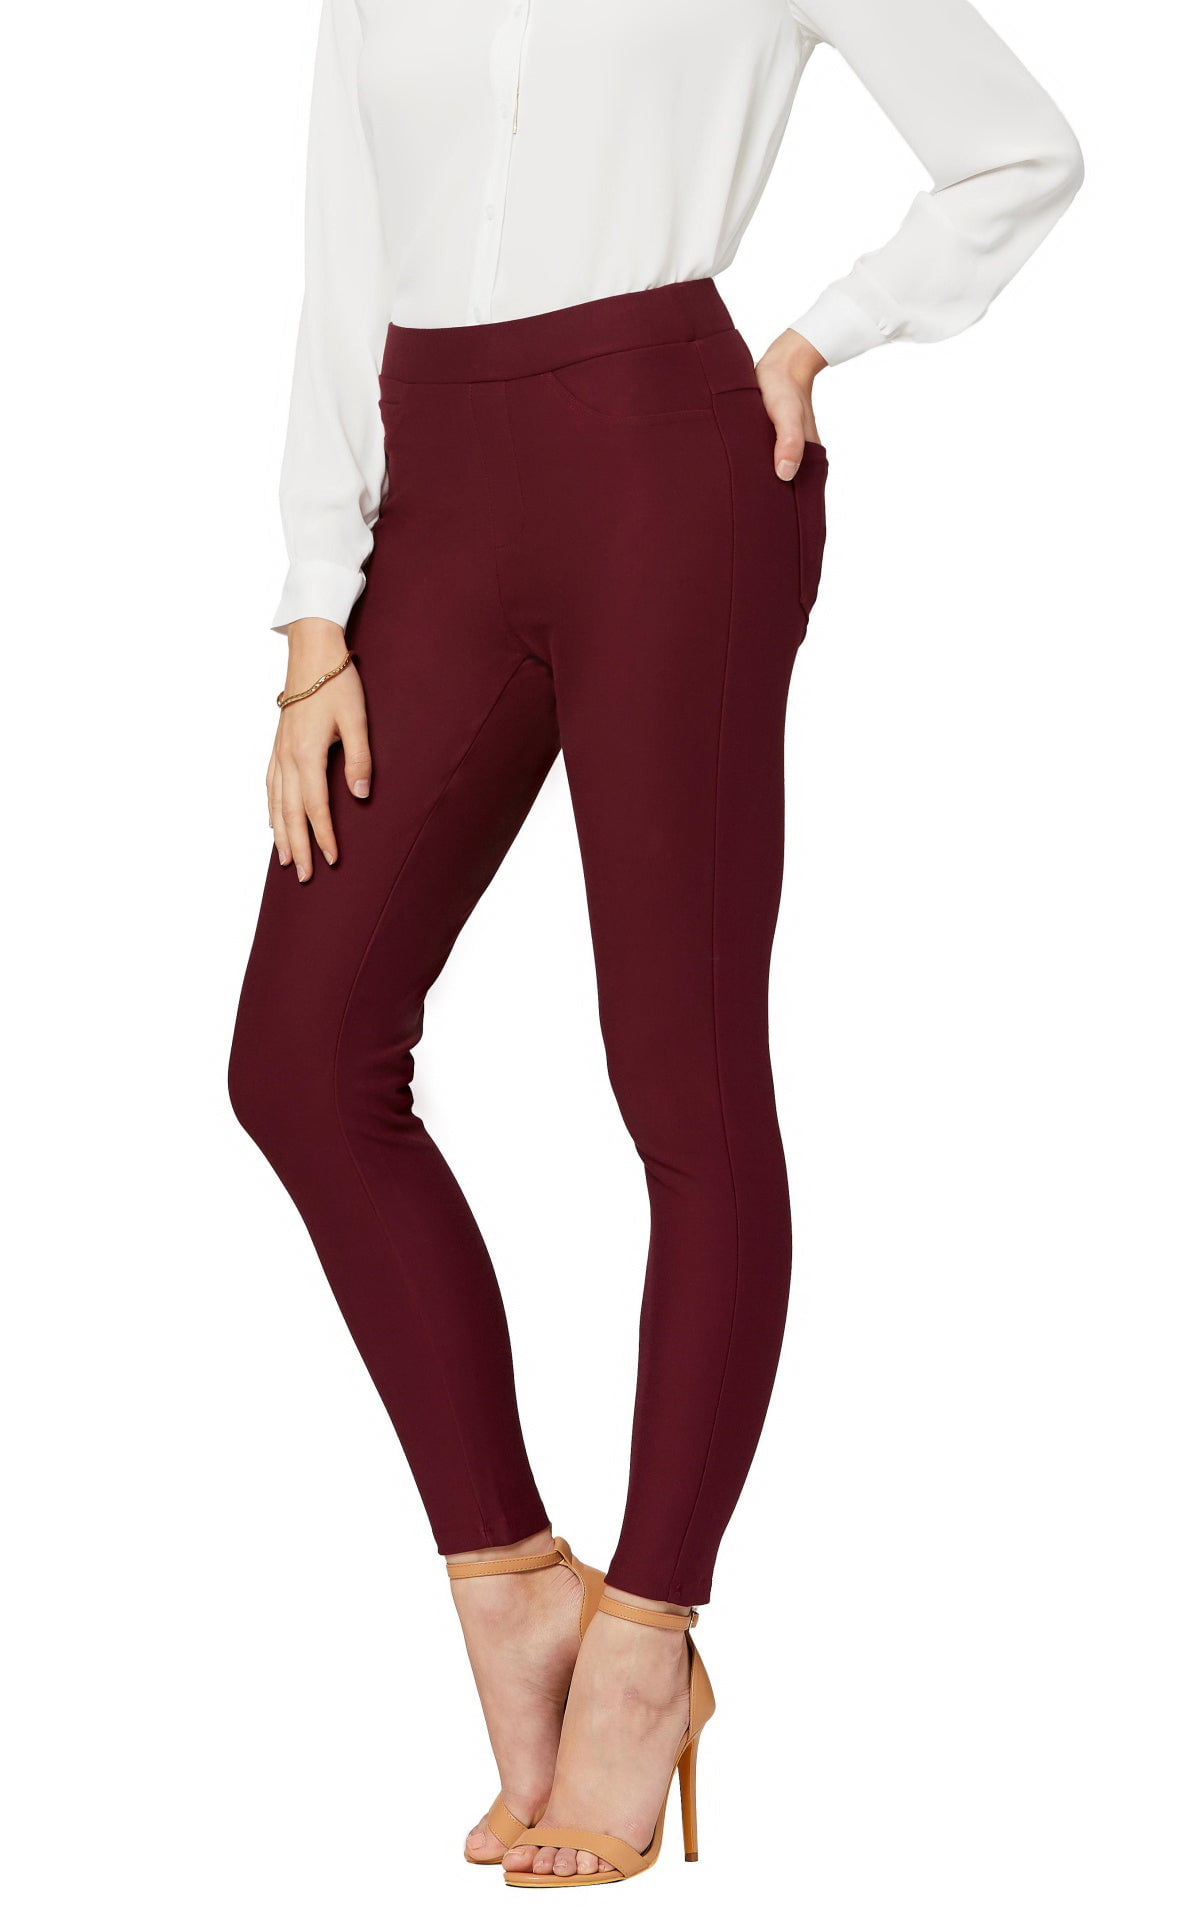 Conceited Women's Motivate Stretch Knit Ponte Pants - Dressy Leggings - Wear  to Work 